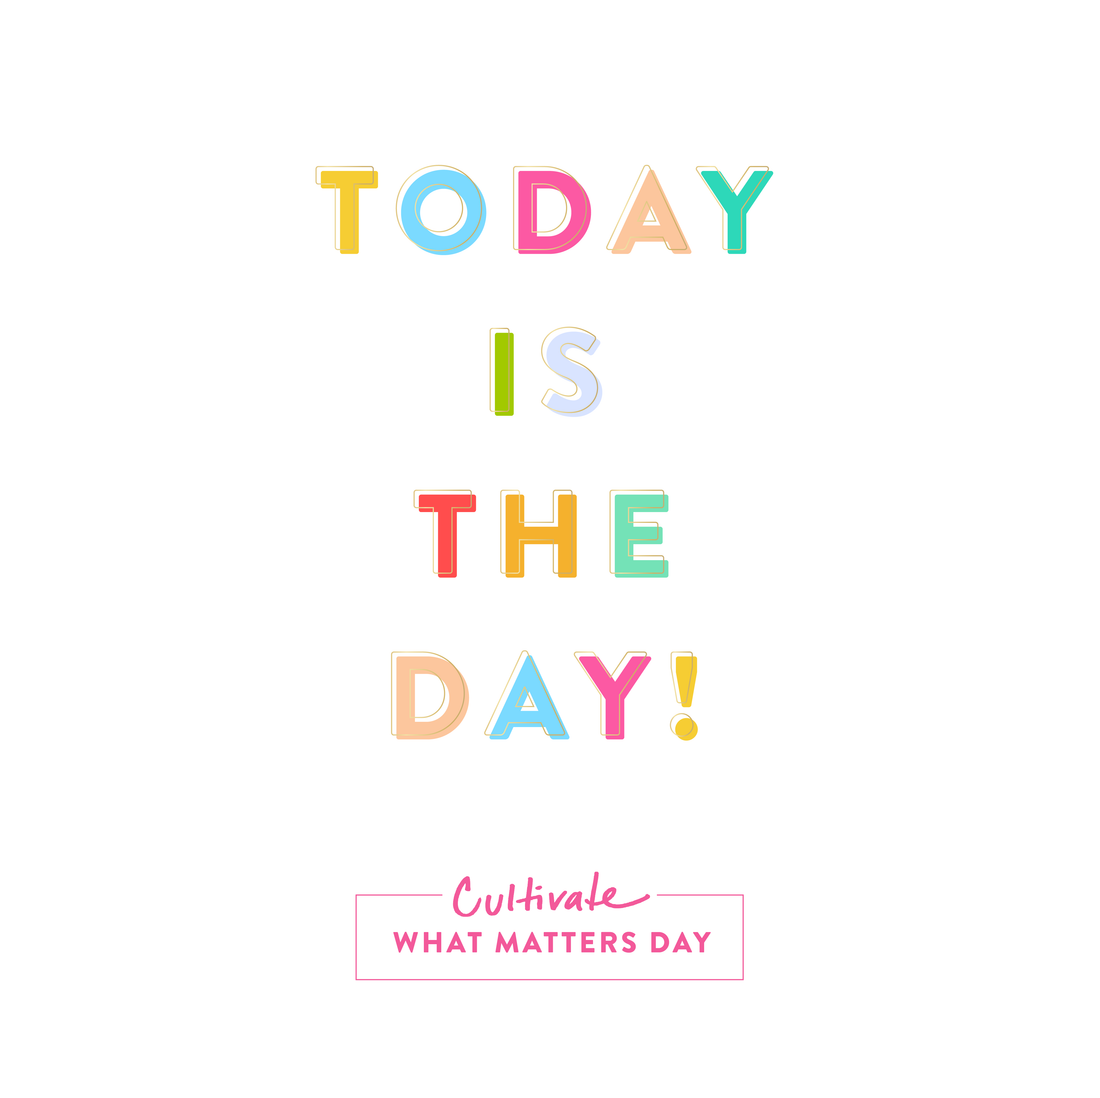 Take your next best step on Cultivate What Matters Day